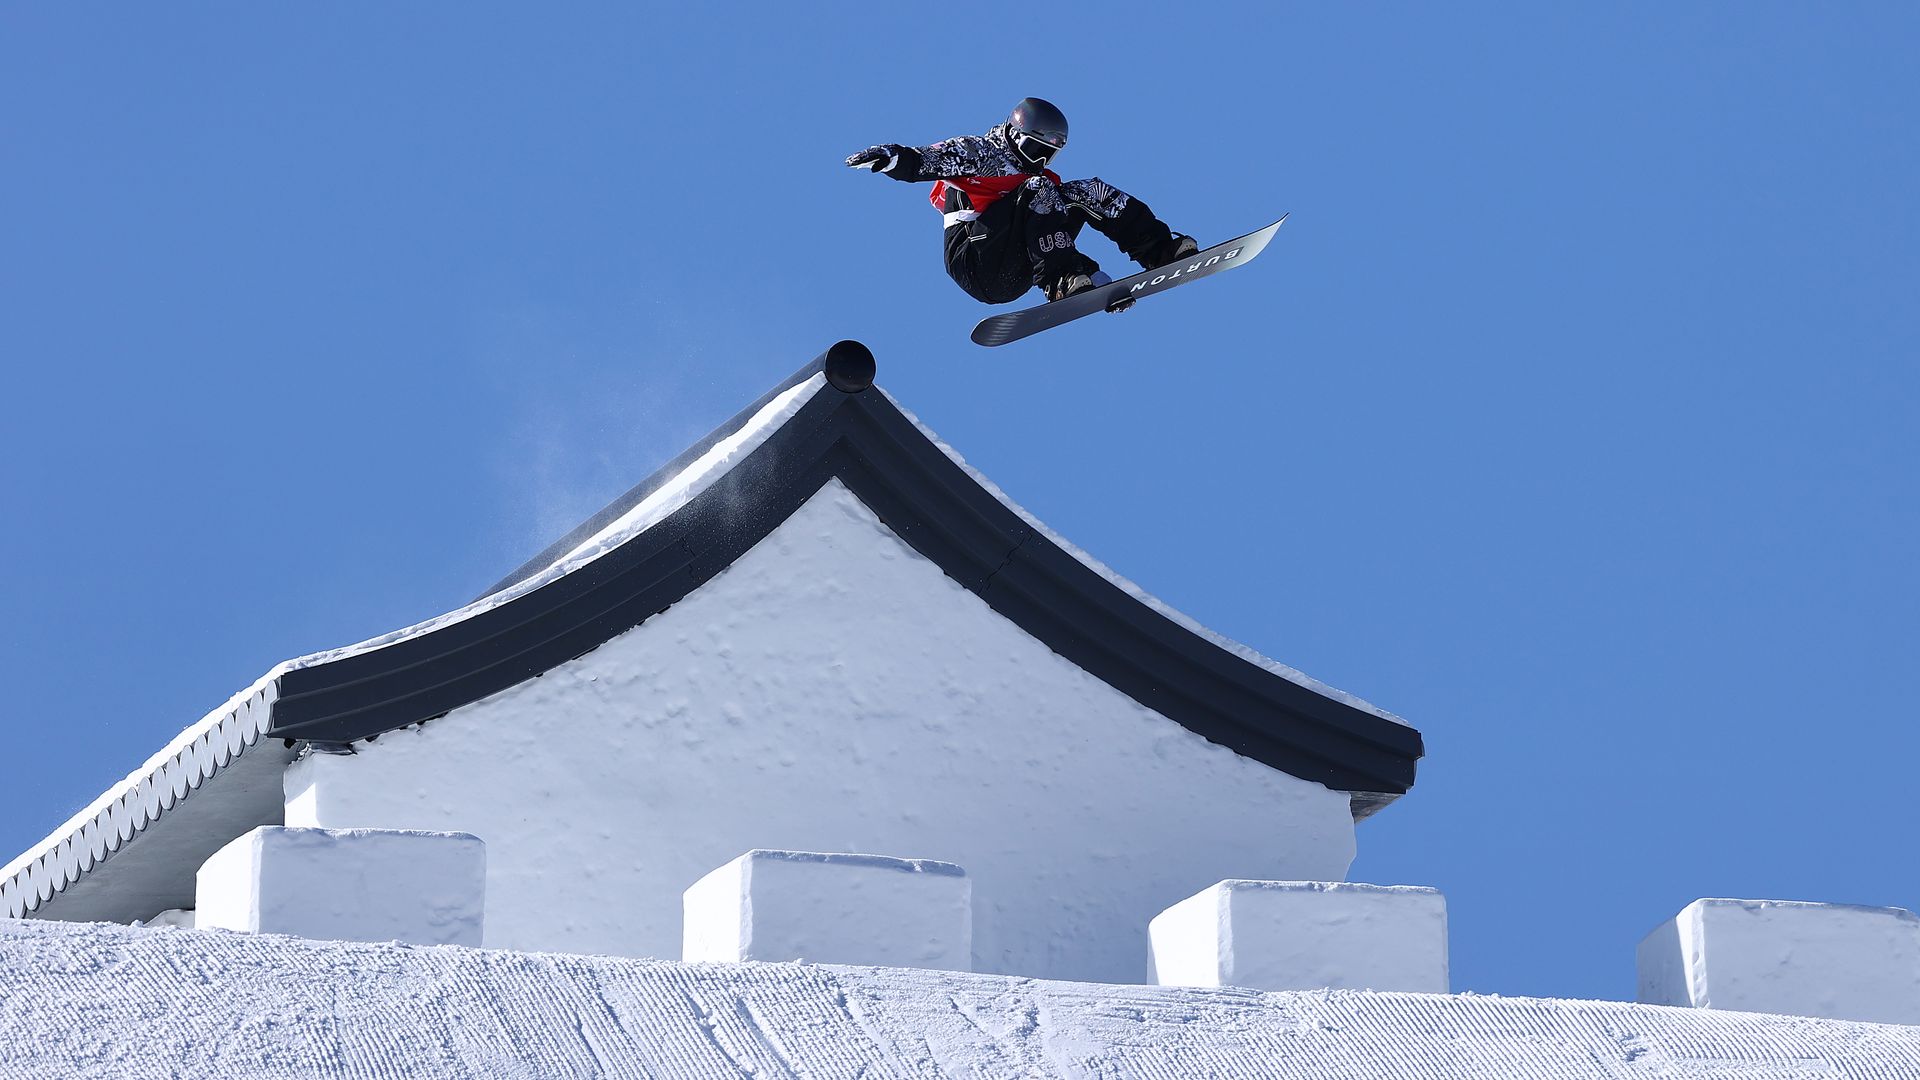 Red Gerard performs a trick during the men's snowboard slopestyle Olympic competition Sunday. Photo: Cameron Spencer/Getty Images